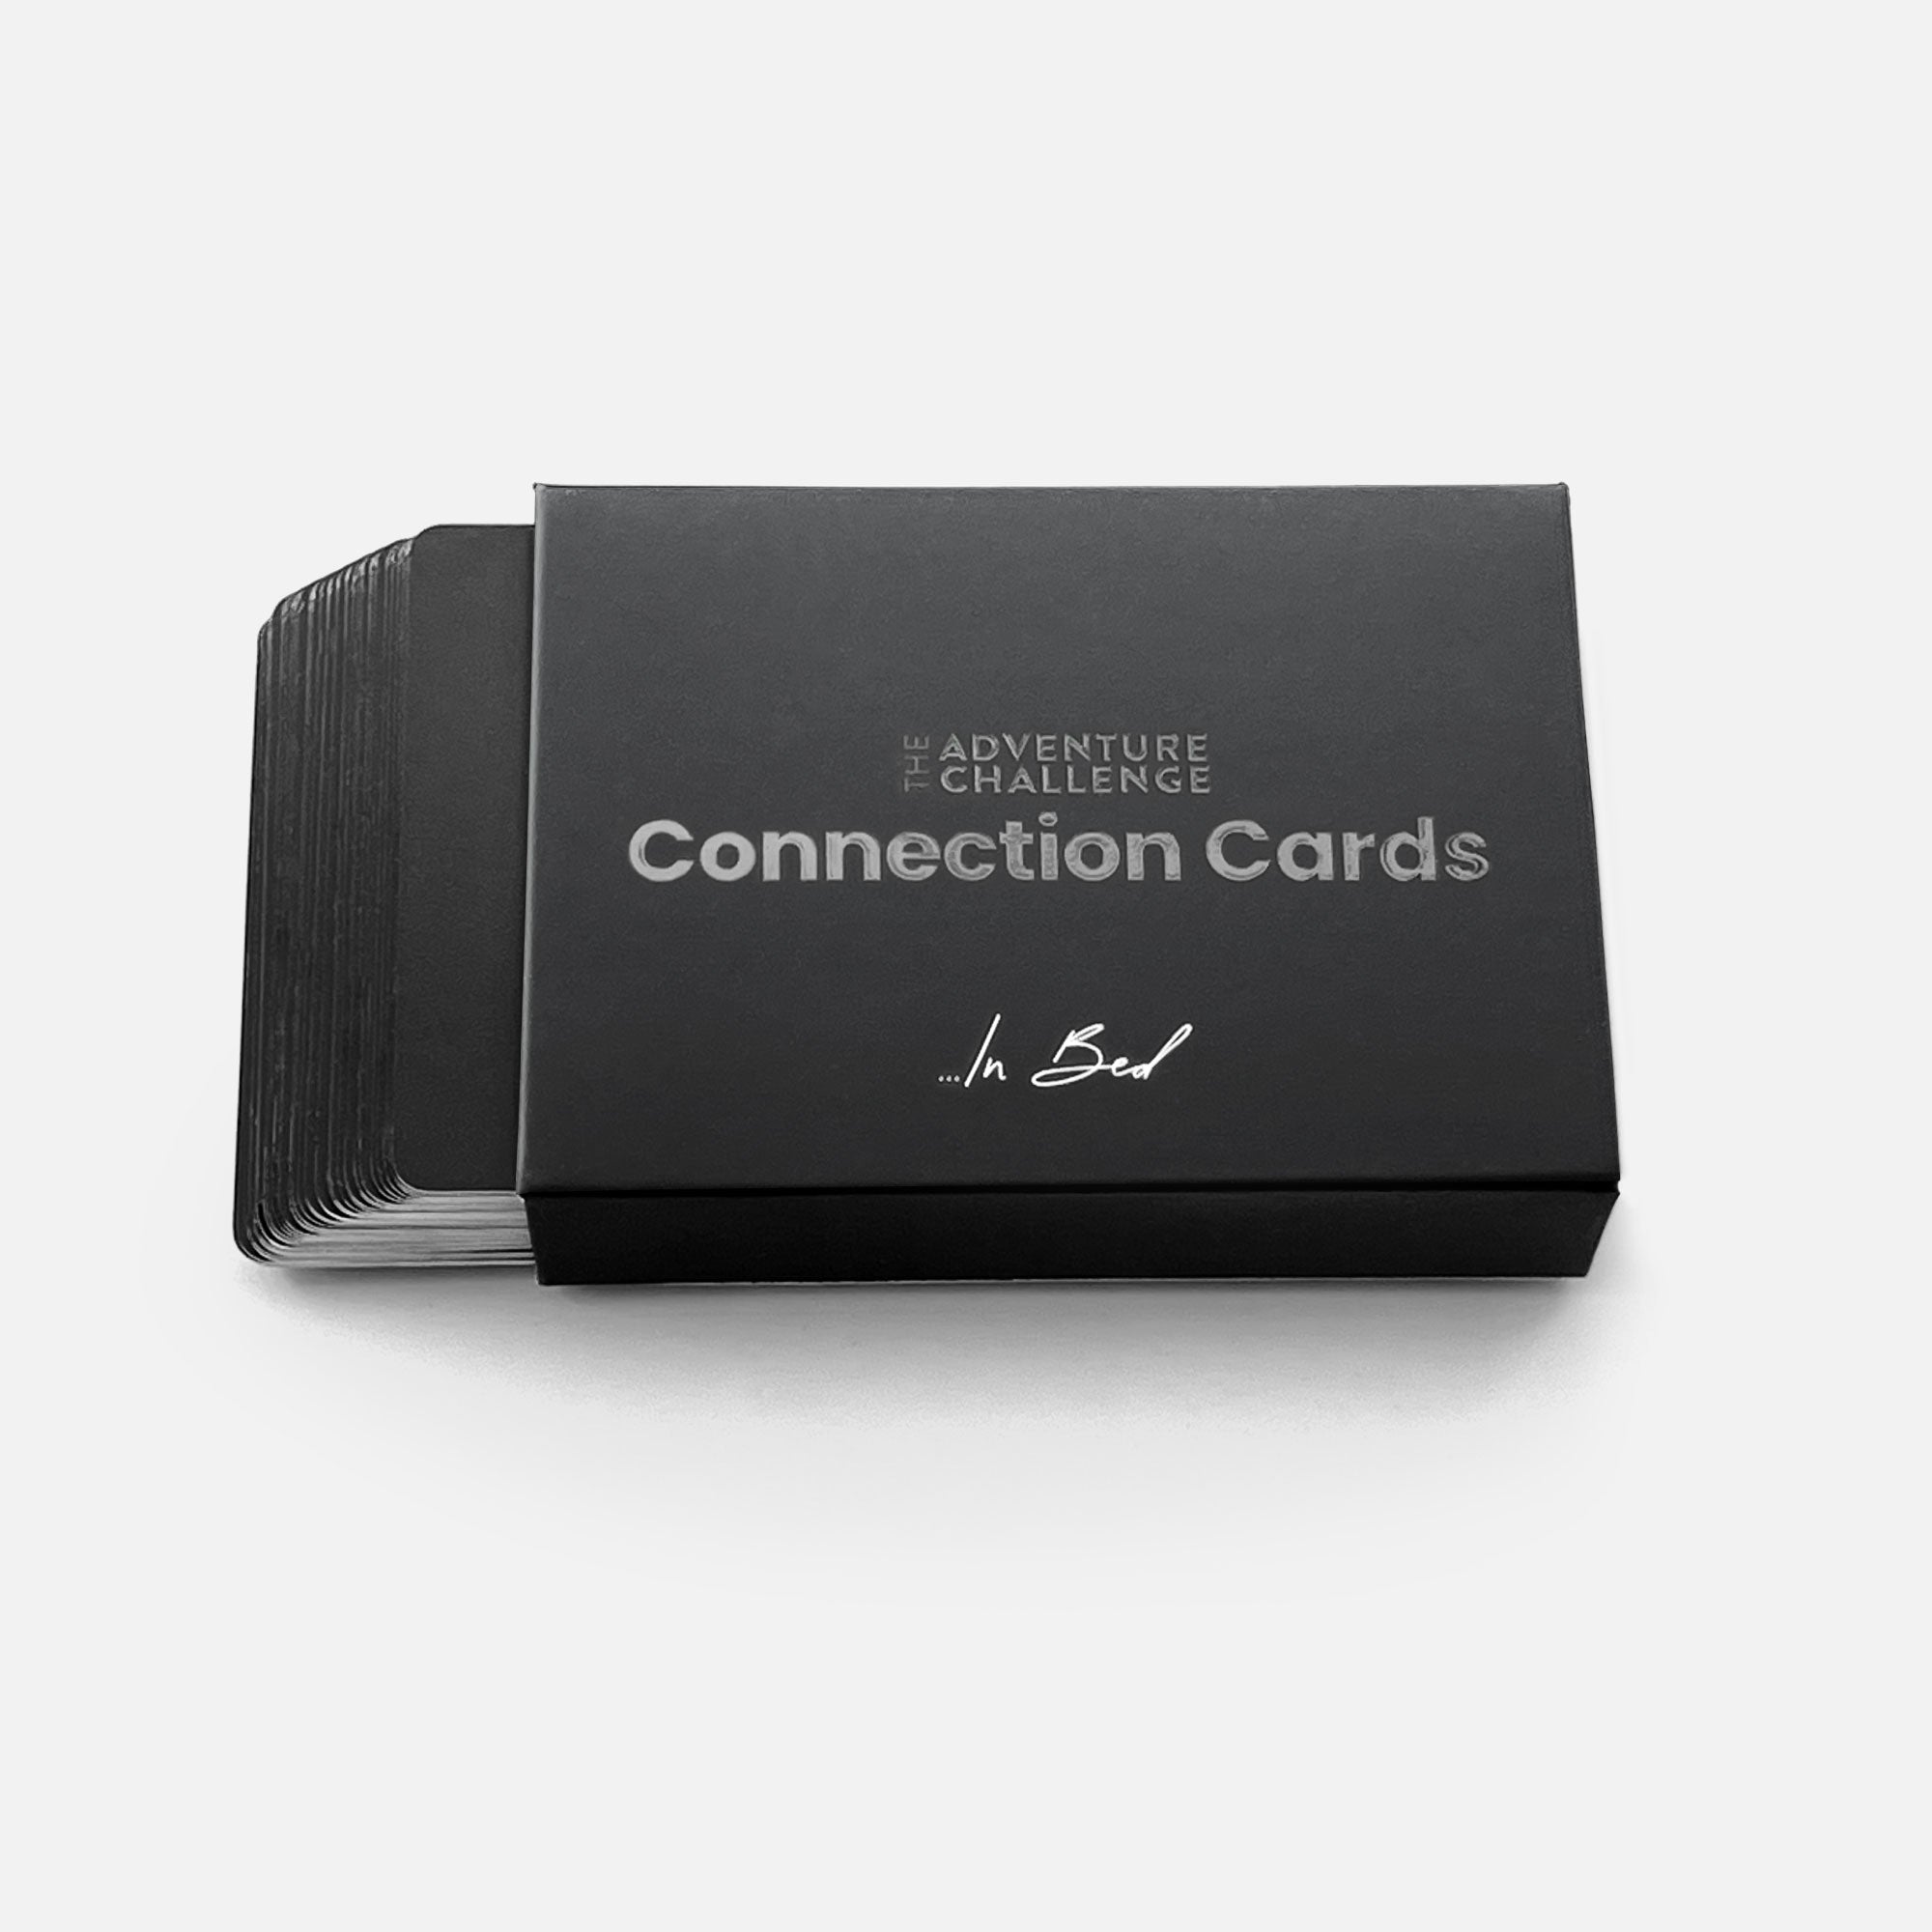 Upgrade your experience with ...In Bed Connection Cards